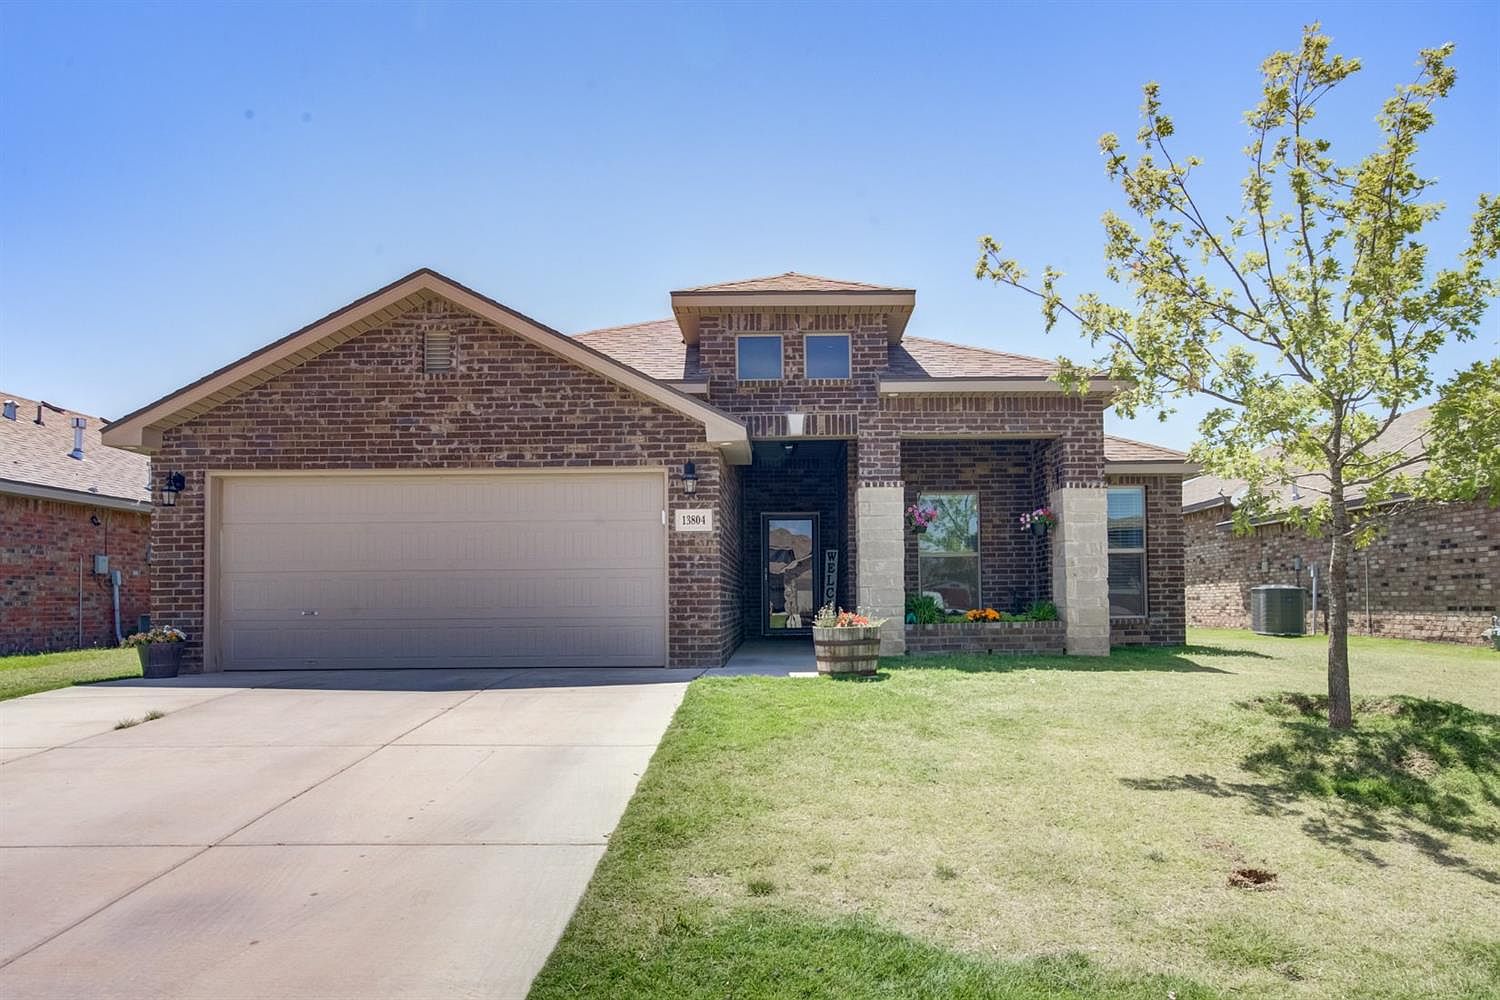 2122 140th St Lubbock Tx 79423 Zillow